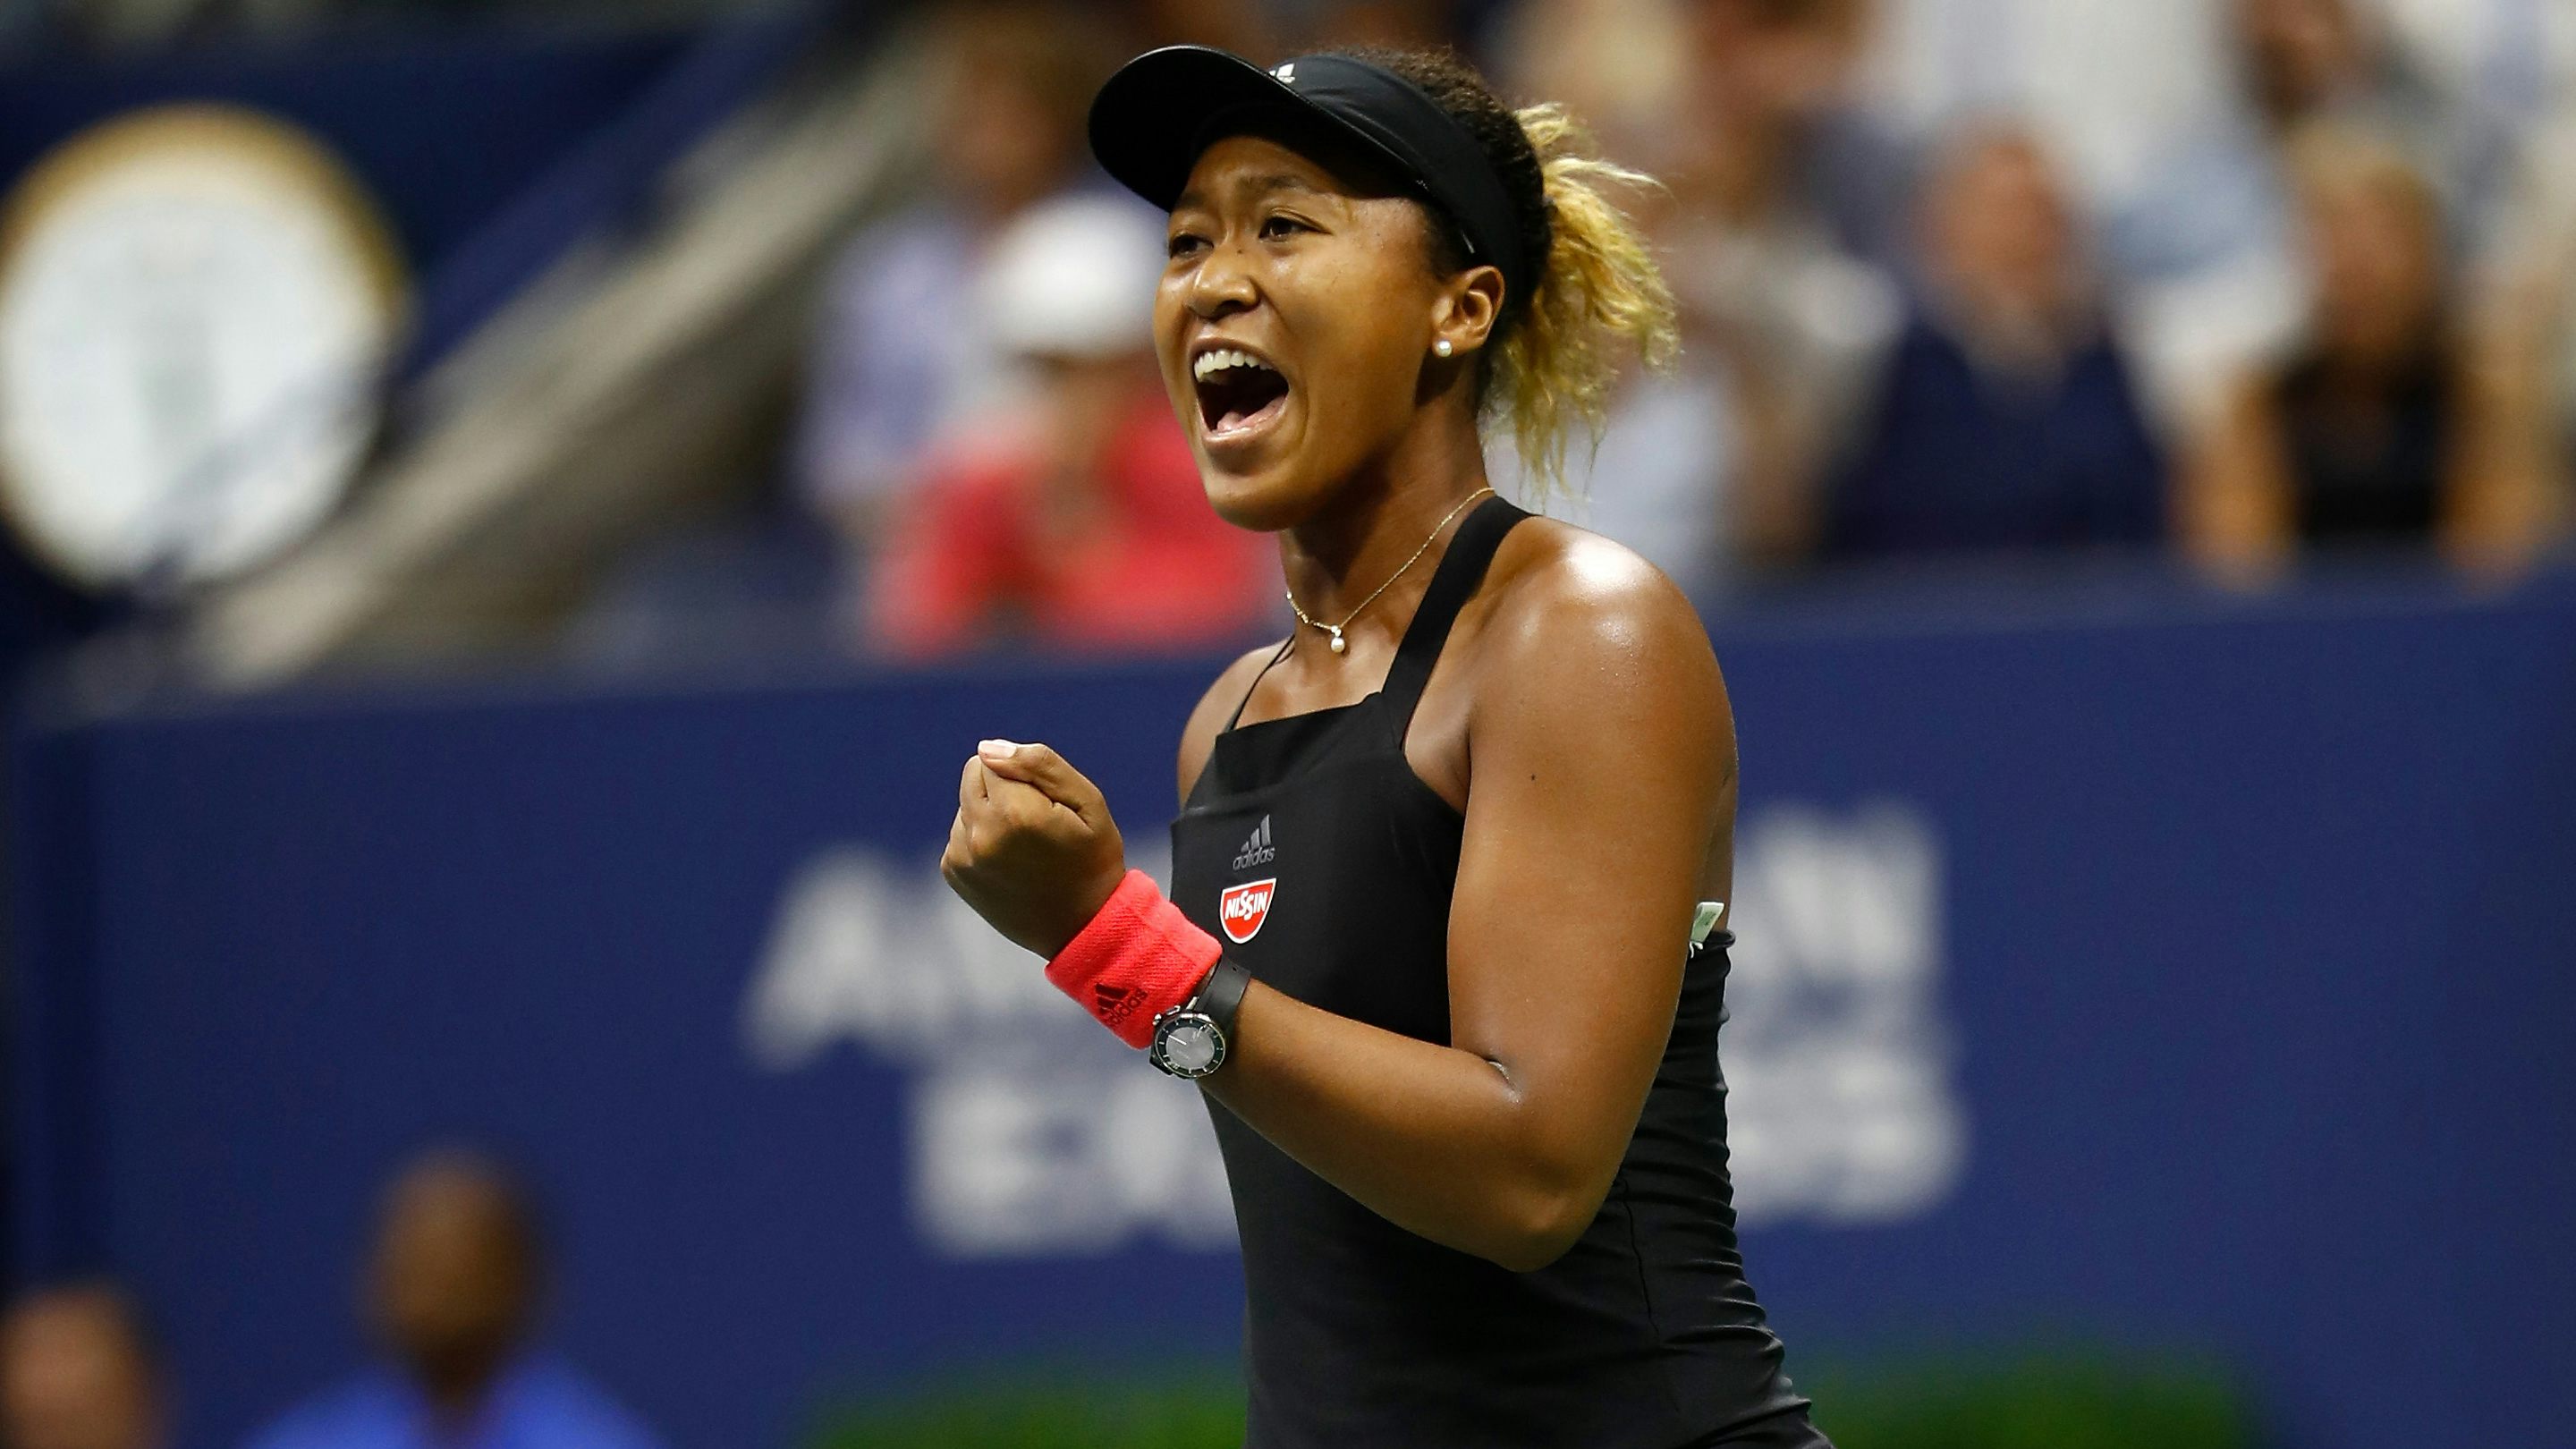 Naomi Osaka Returns to the Stage, on Her Terms - The New York Times